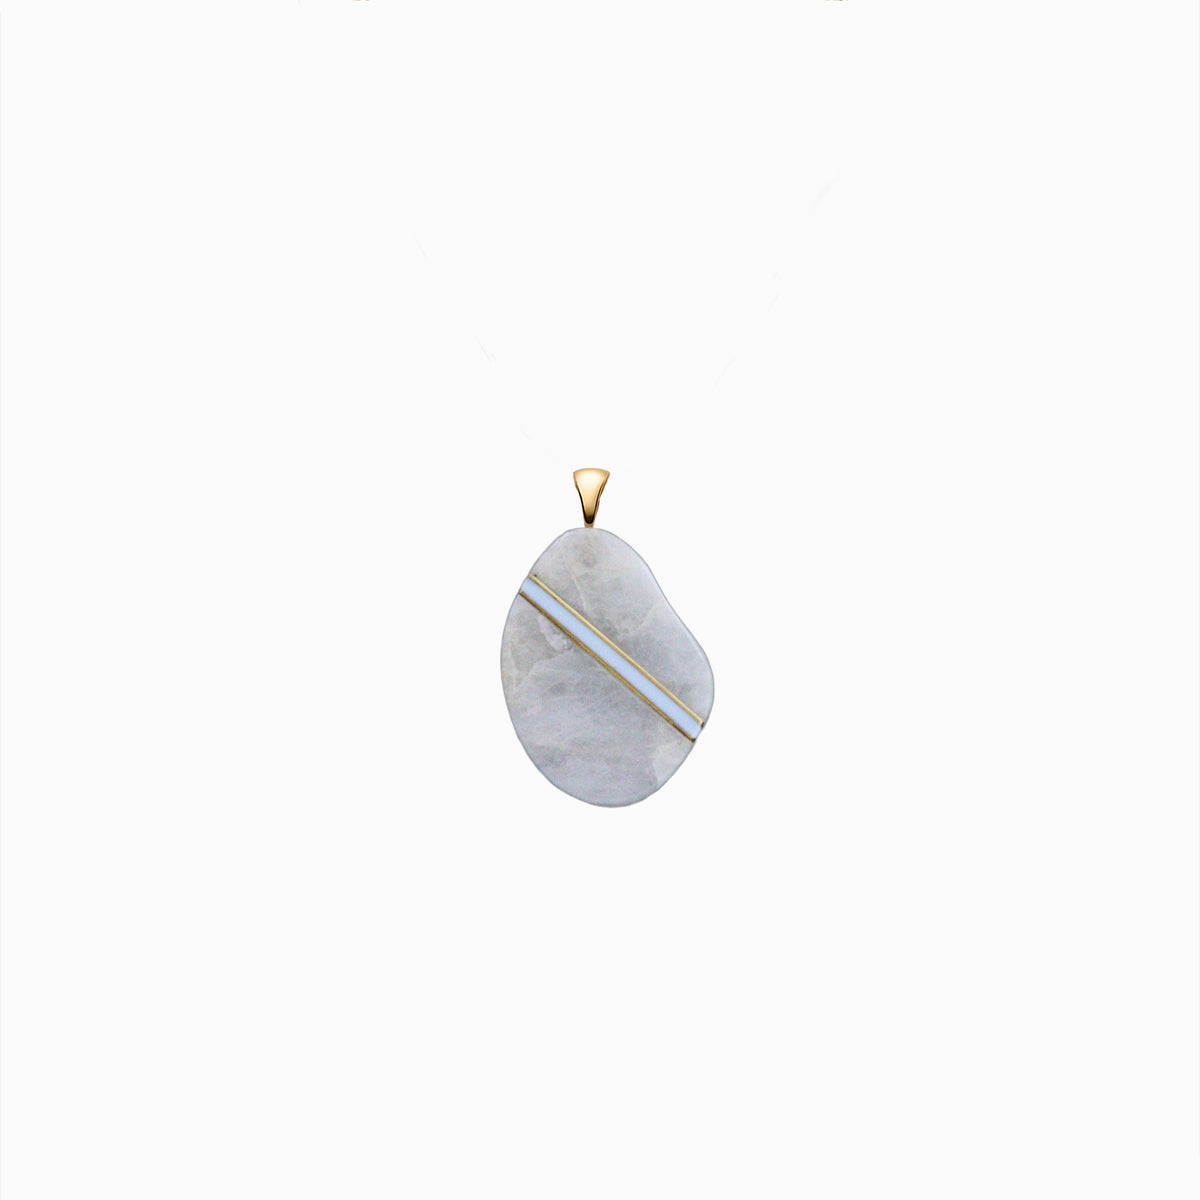 Out East Pebble Pendant with Enamel